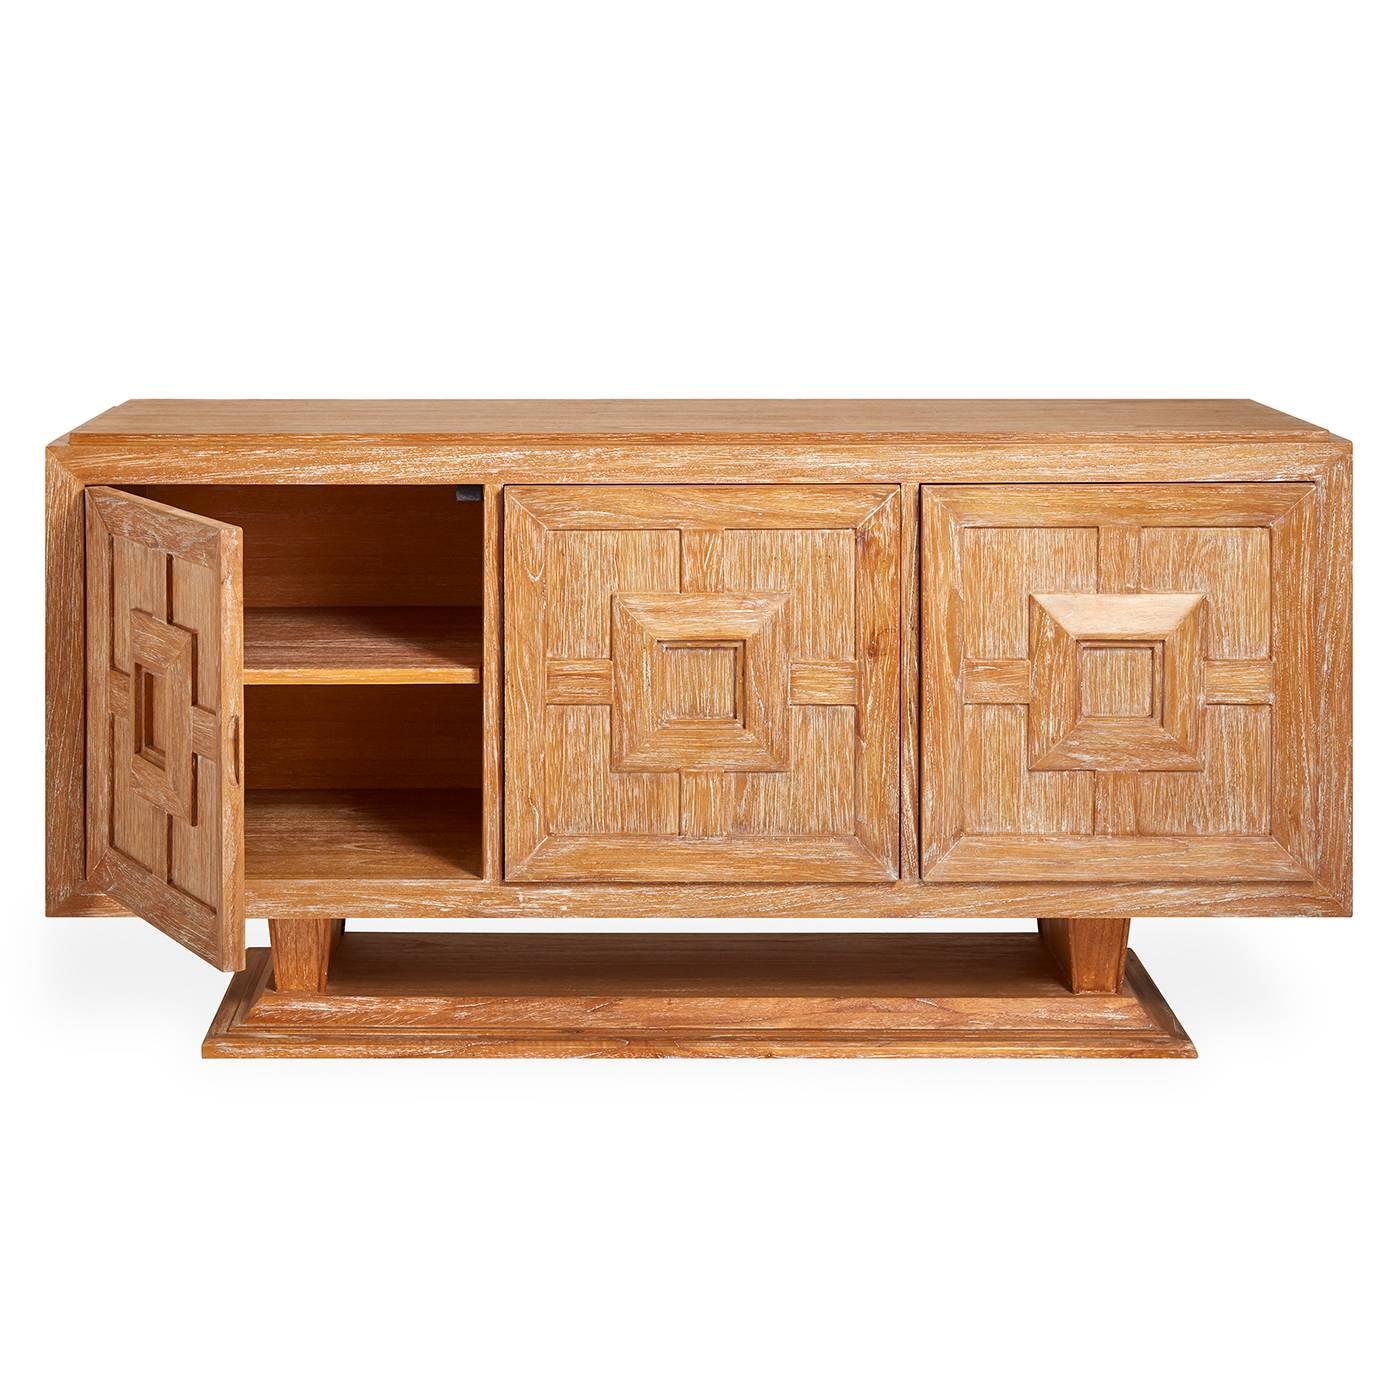 Limed Luxury. Familiar but fresh, our Antwerp Credenza is the kind of piece you fantasize about stumbling upon at Paris' Marche aux Puces. Think French '50s limed furniture reimagined in a 21st century idiom. The credenza features our signature